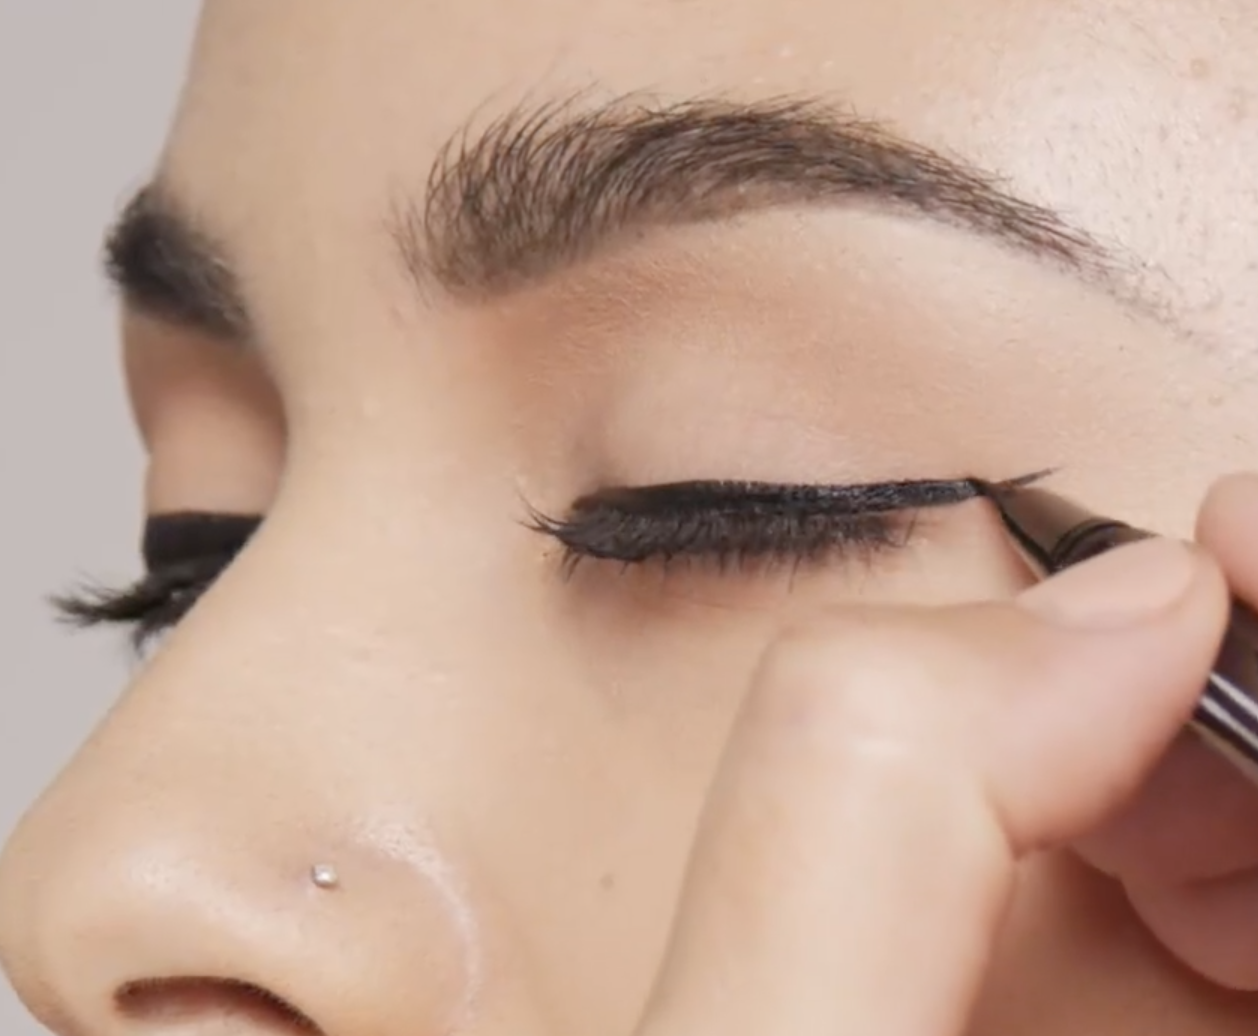 A person putting eyeliner on their eyelid